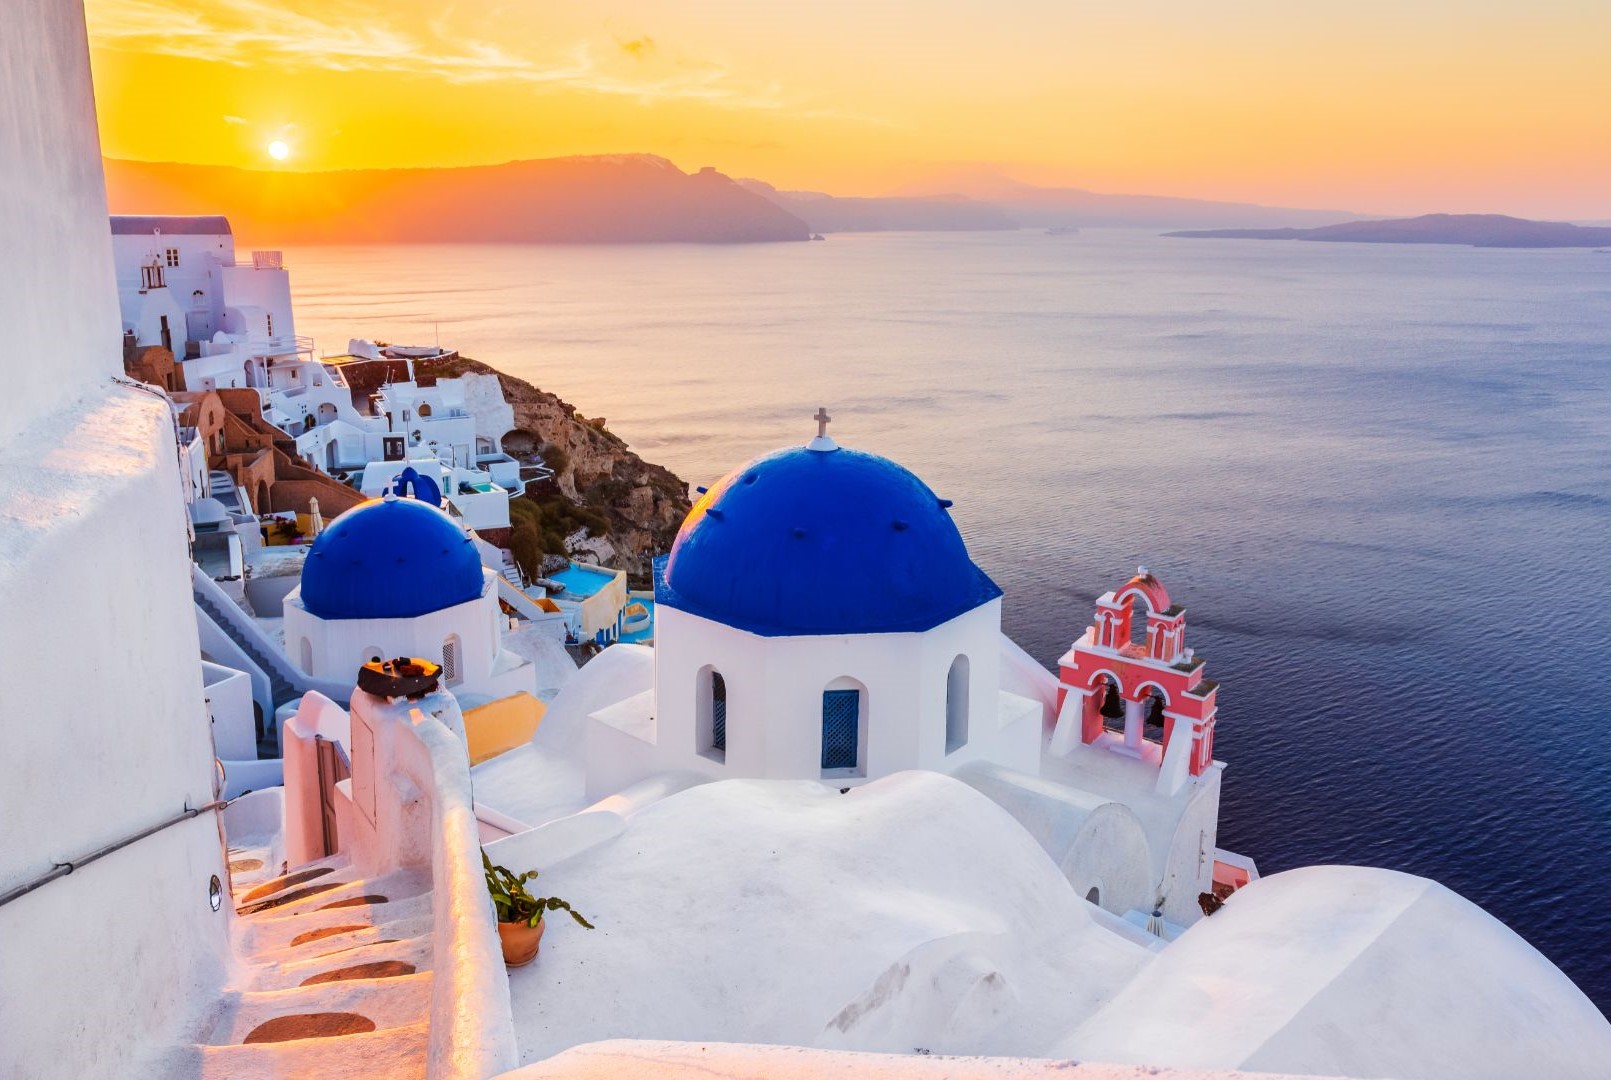 The famous Santorini with stunning landscapes.